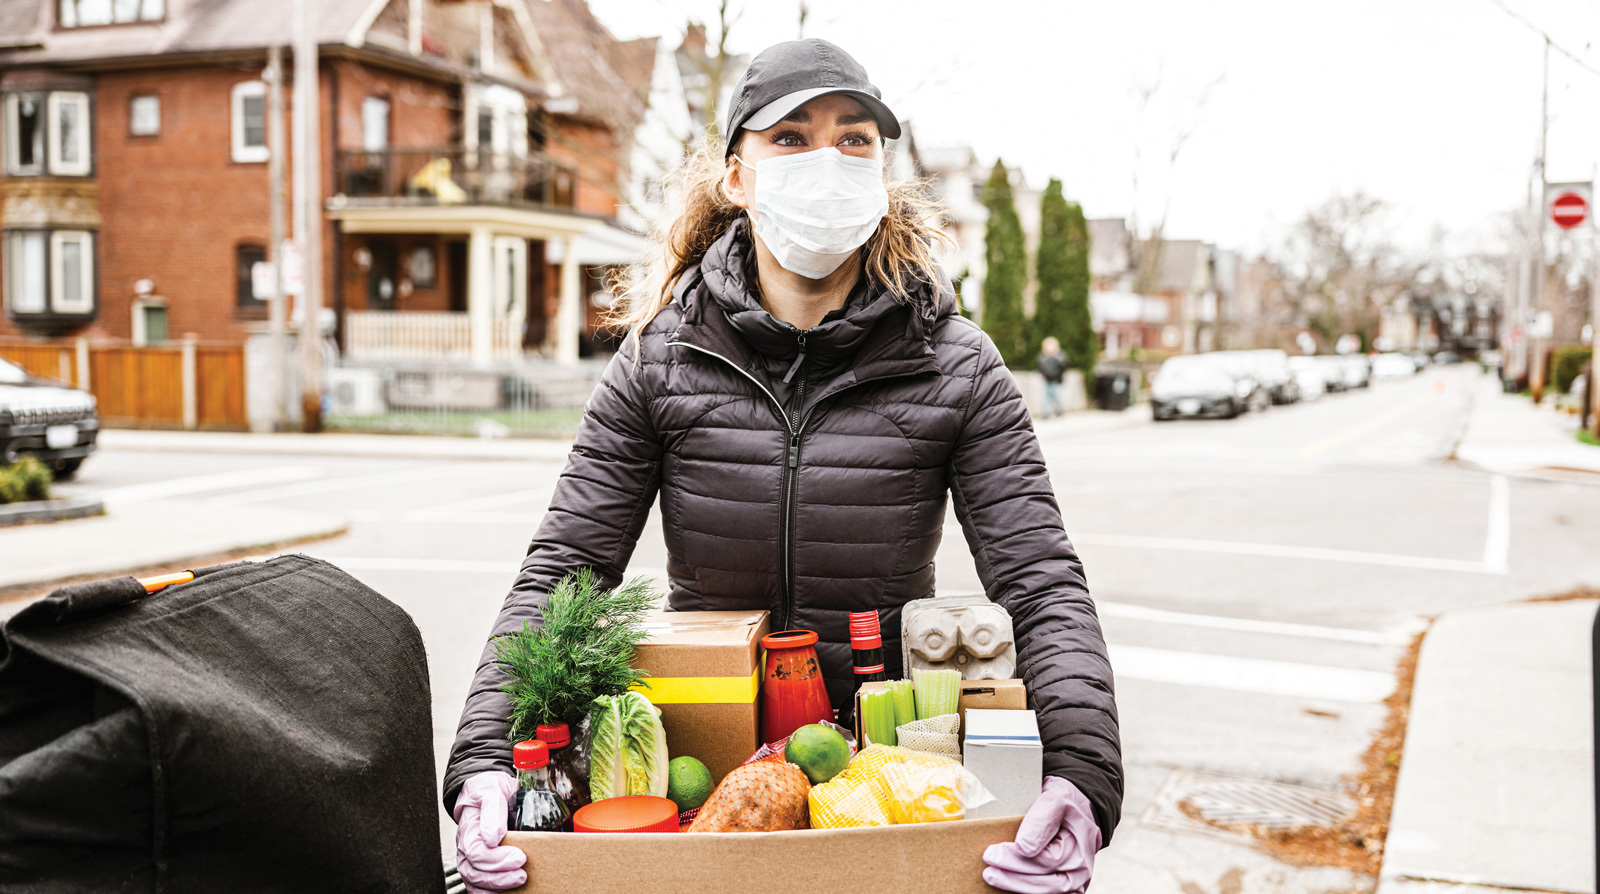 Public health worker serves her community by delivering nutrient-rich foods to underserved areas.